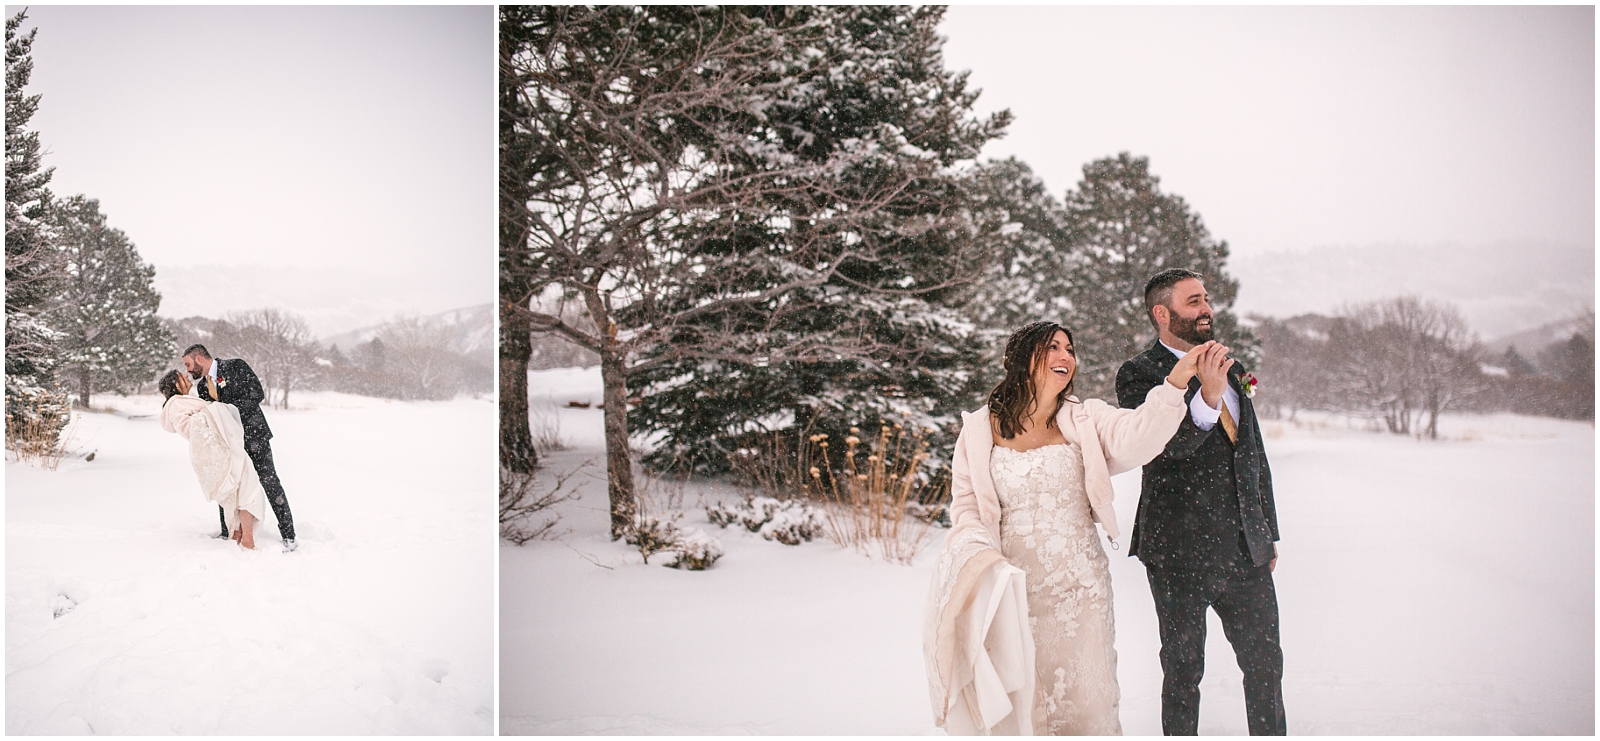 Bride and groom dancing in the snow storm at winter wedding at Arrowhead Golf Club